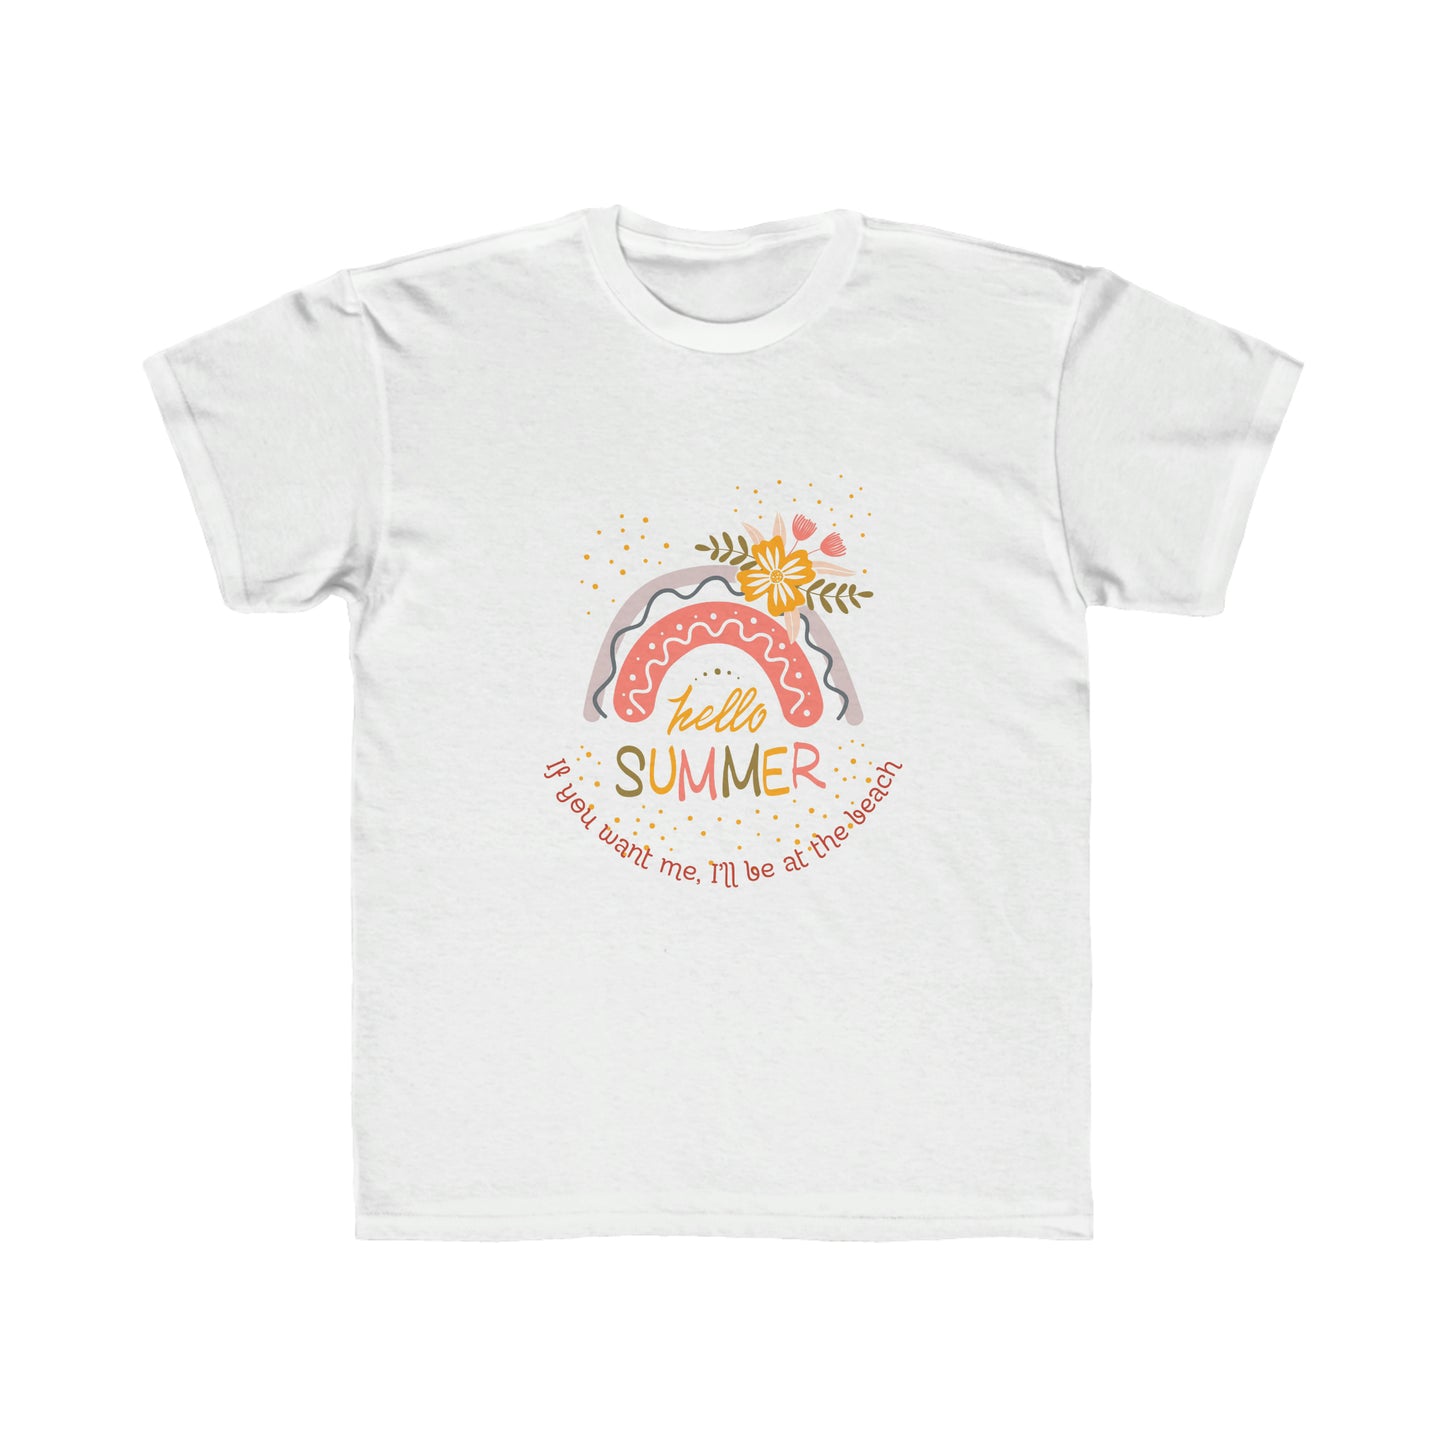 ‘If you want me, I’ll be at the beach’ Printed Front & Back. Kids Regular Fit Tee